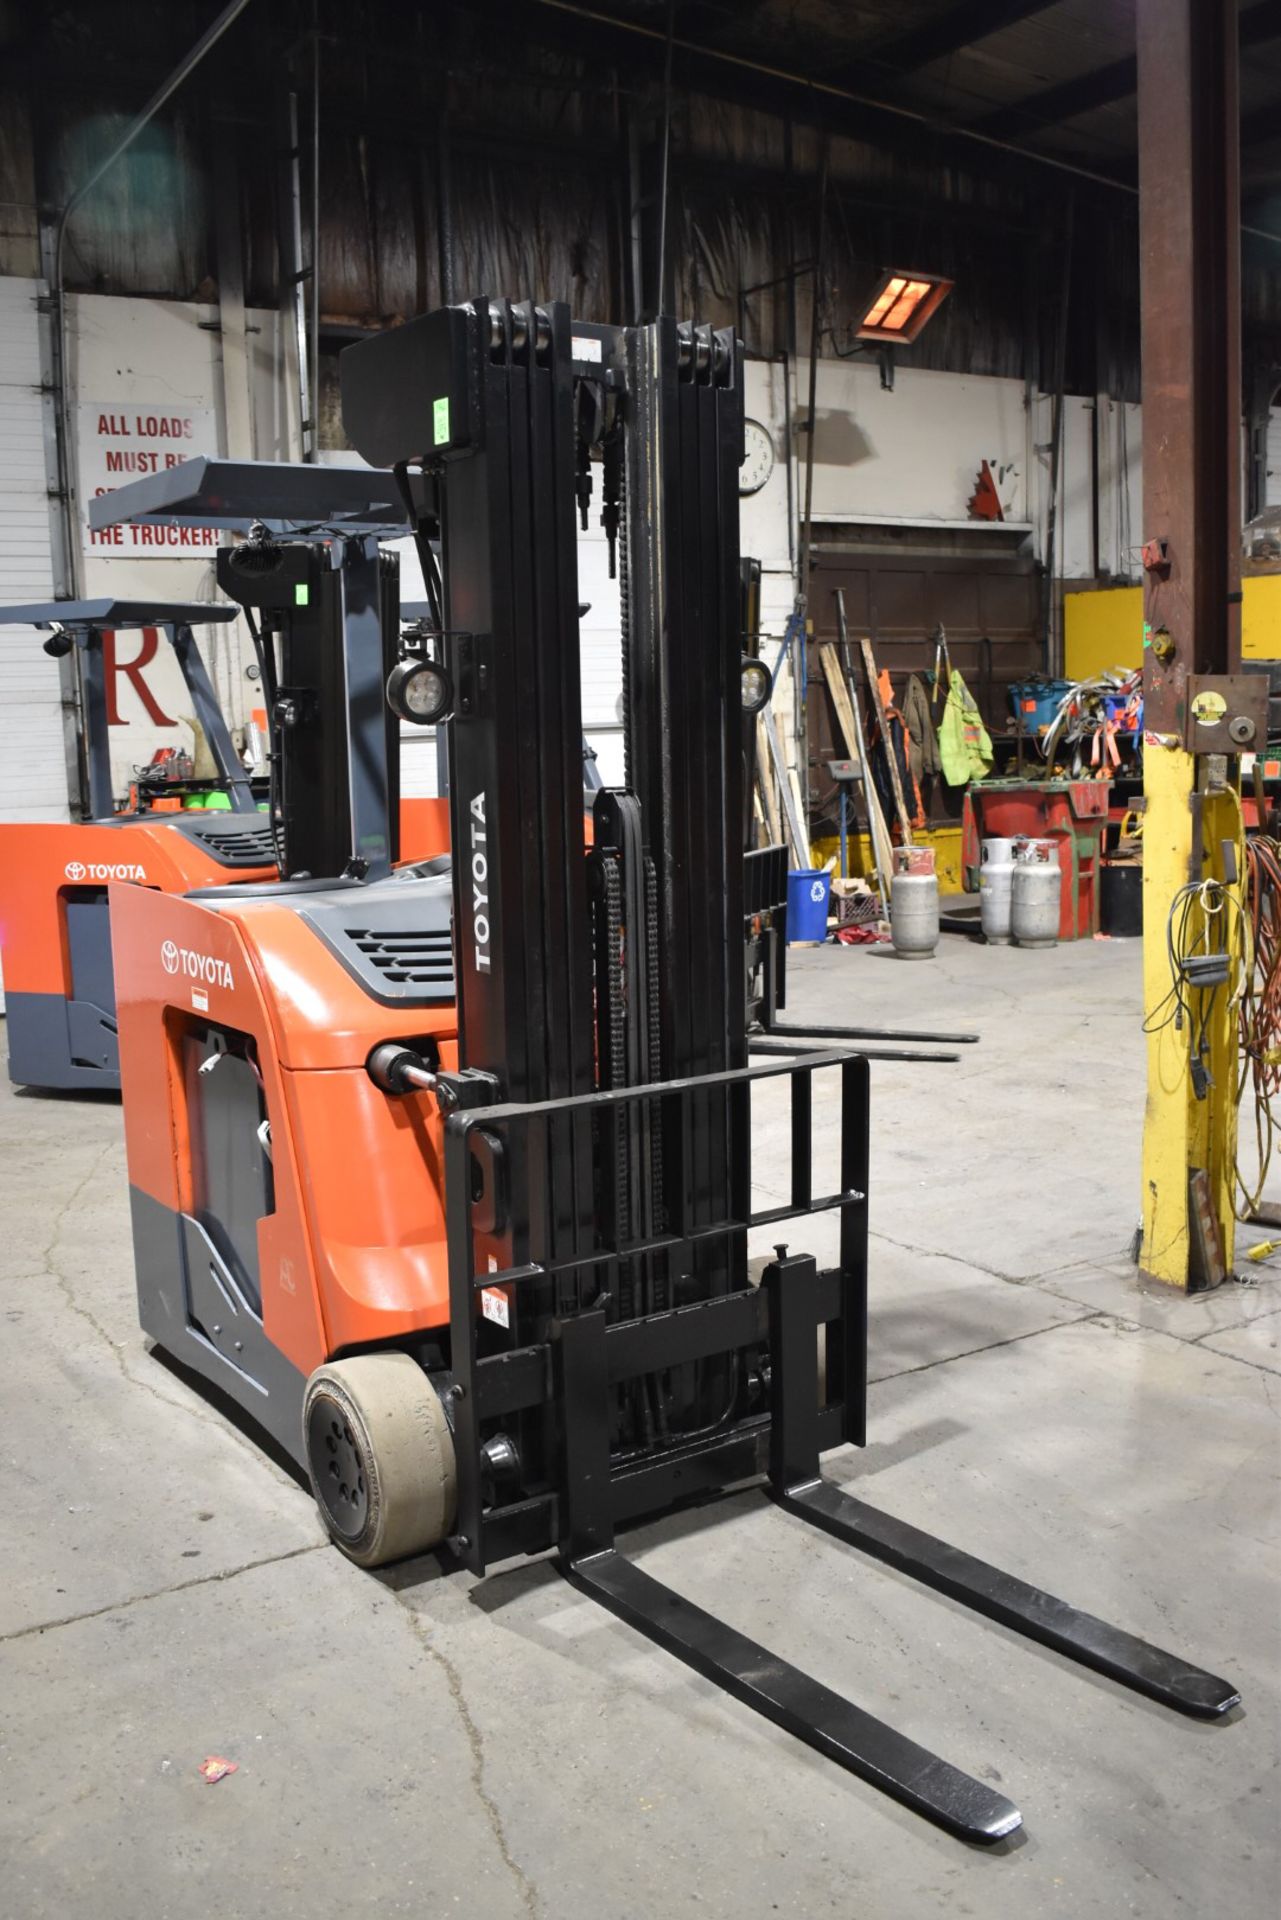 TOYOTA (2017) 8BNCU20 STAND ON ELECTRIC FORKLIFT WITH, 4,000LBS CAPACITY, 36V BATTERY, 276.5" MAX - Image 4 of 7